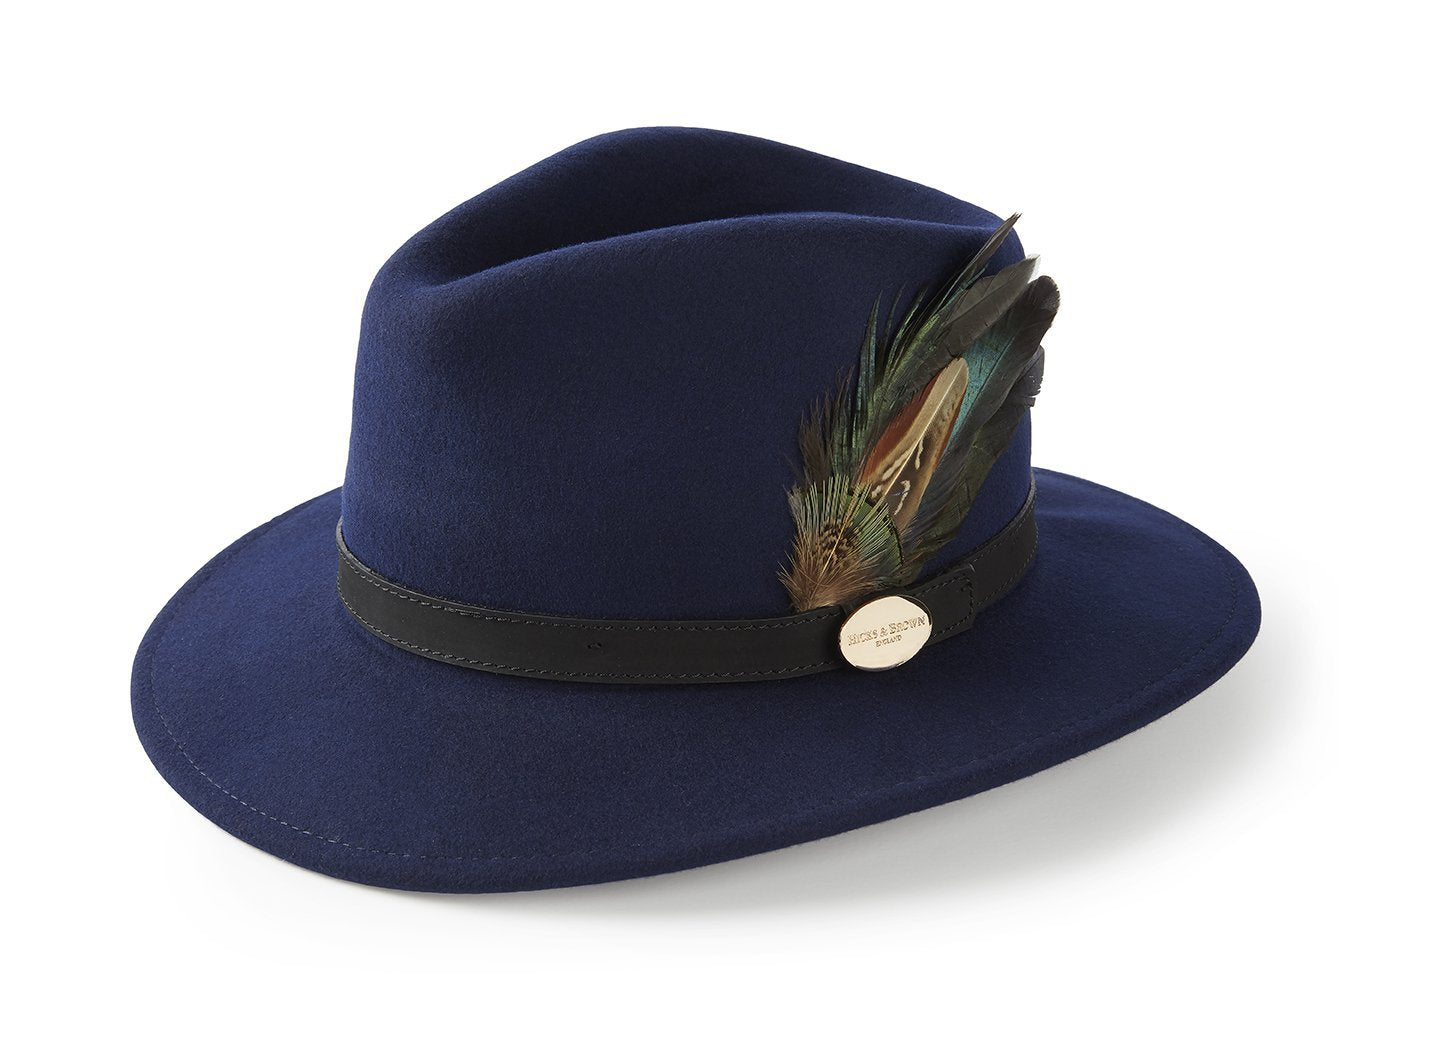 Hicks & Brown Fedora The Suffolk Fedora in Navy (Classic Feather)